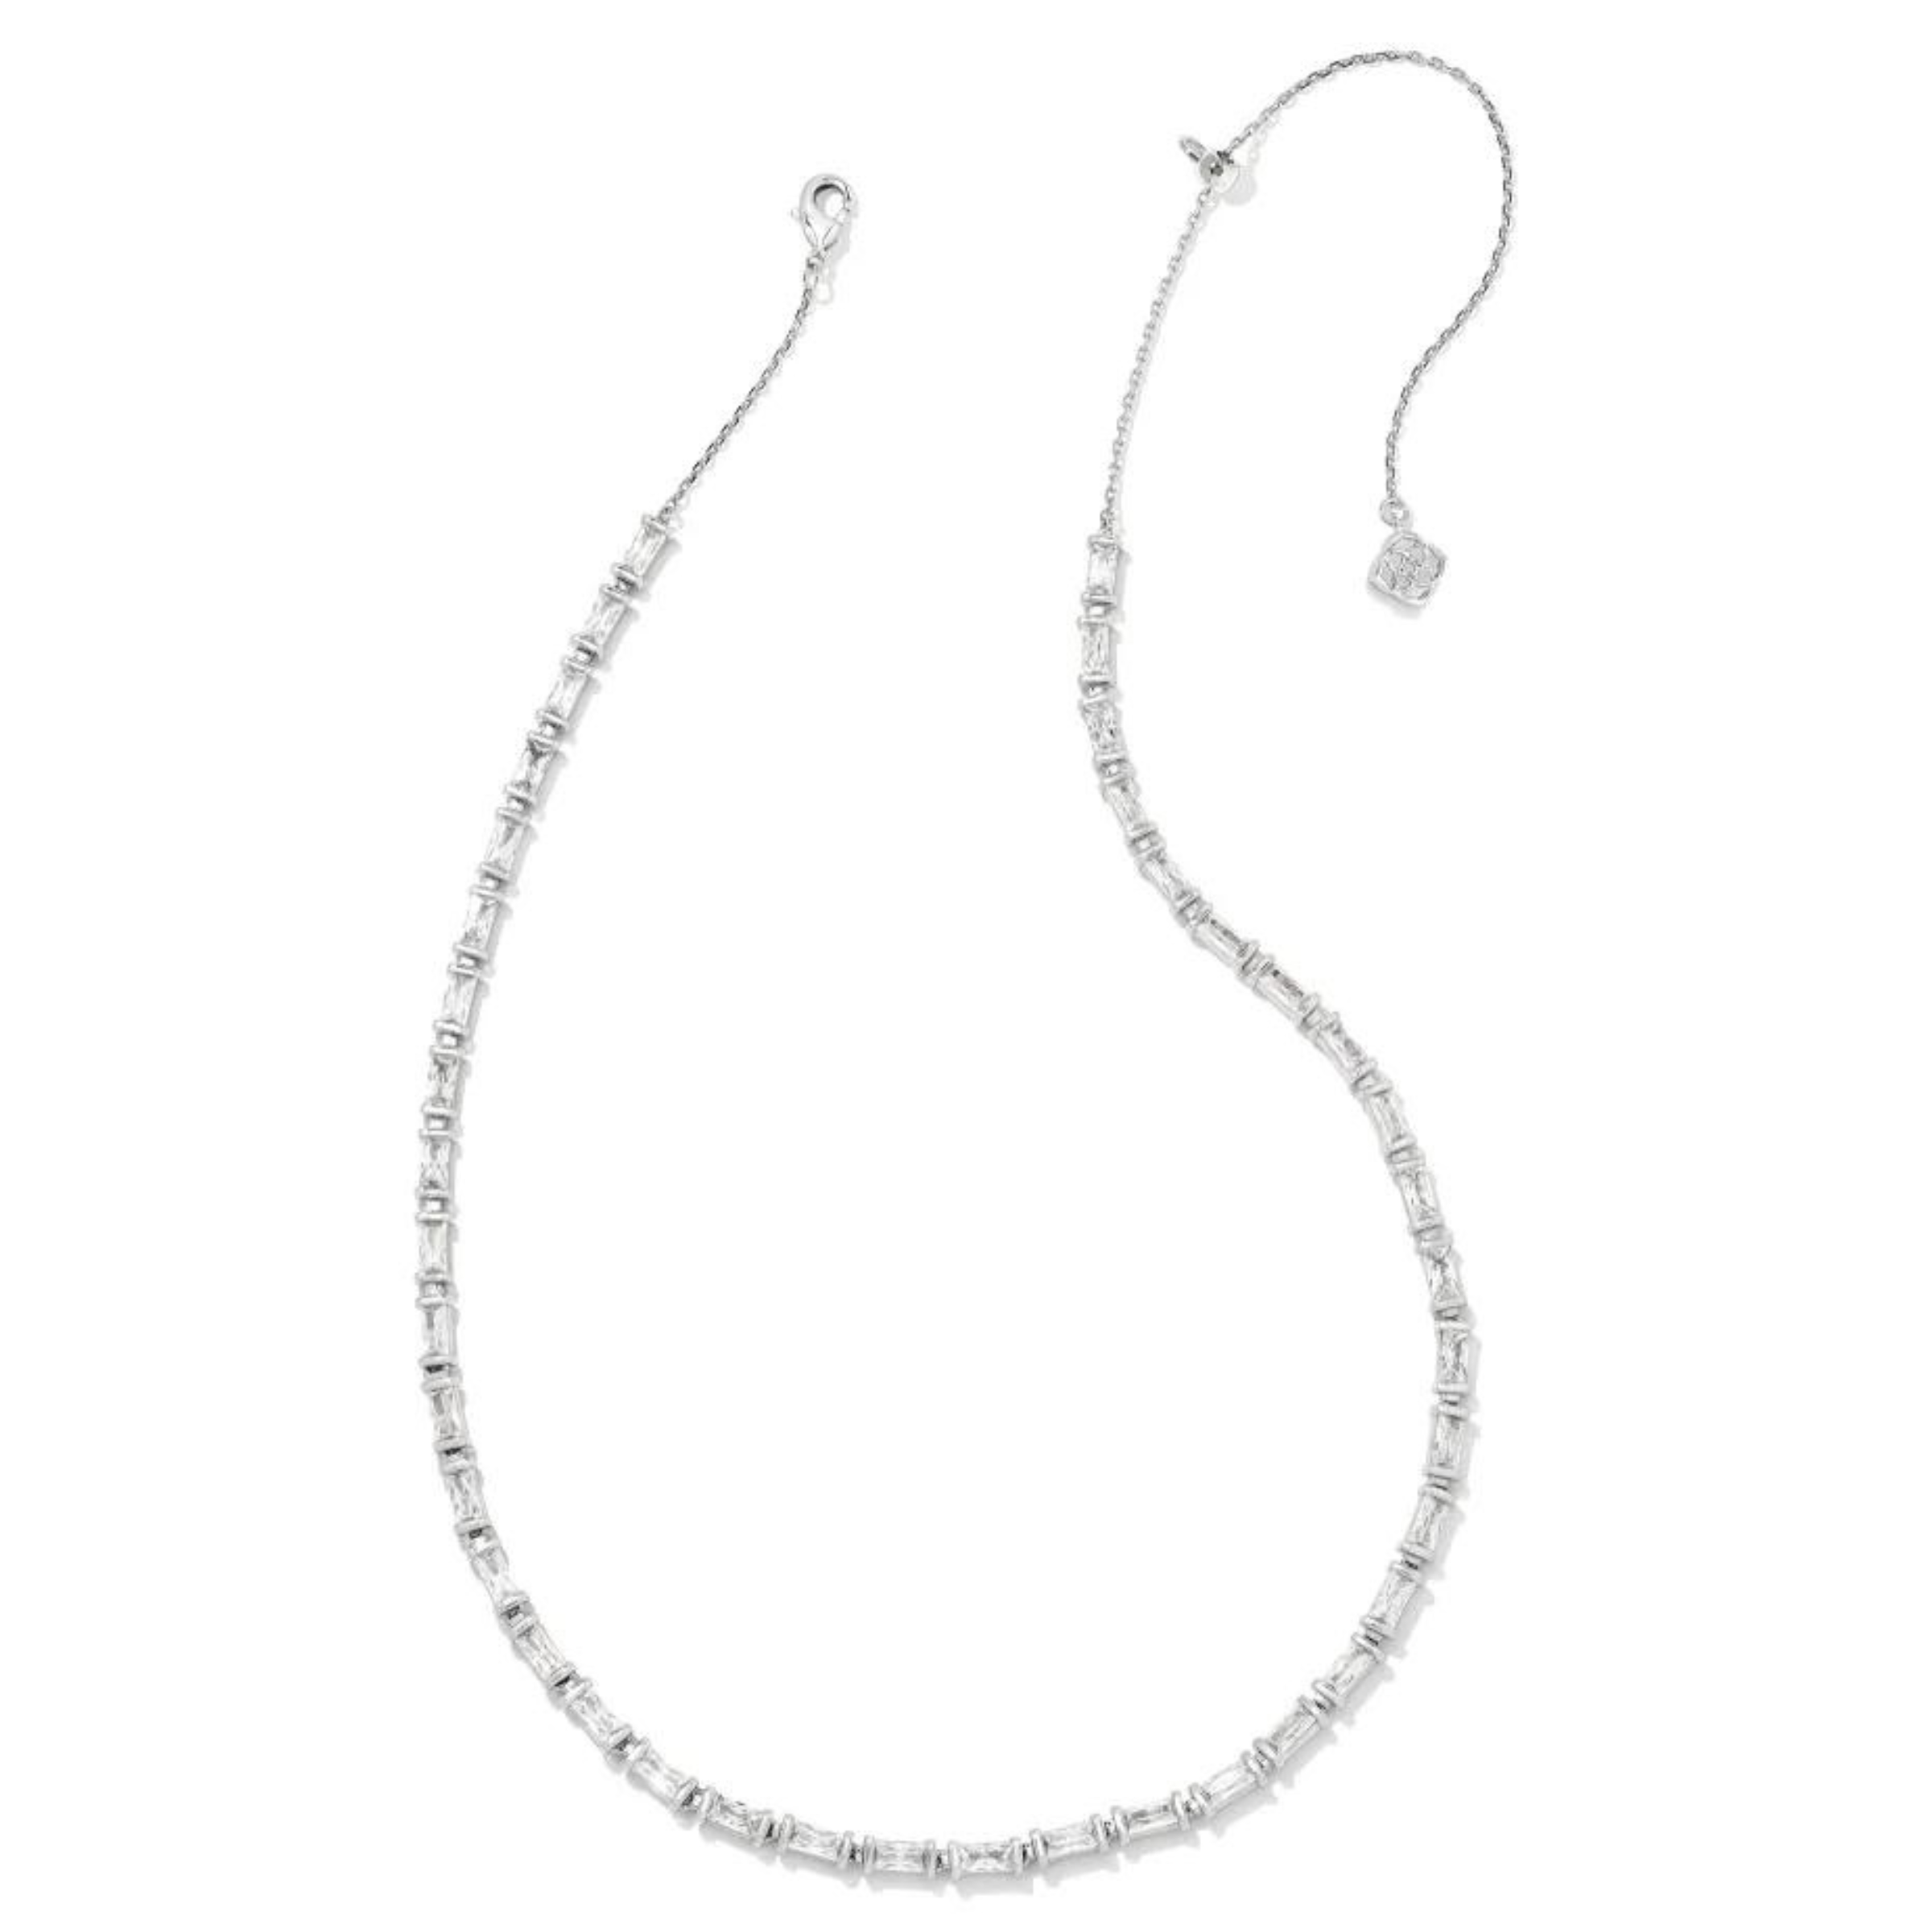 Rectangle, clear crystal chain necklace pictured on a white background.